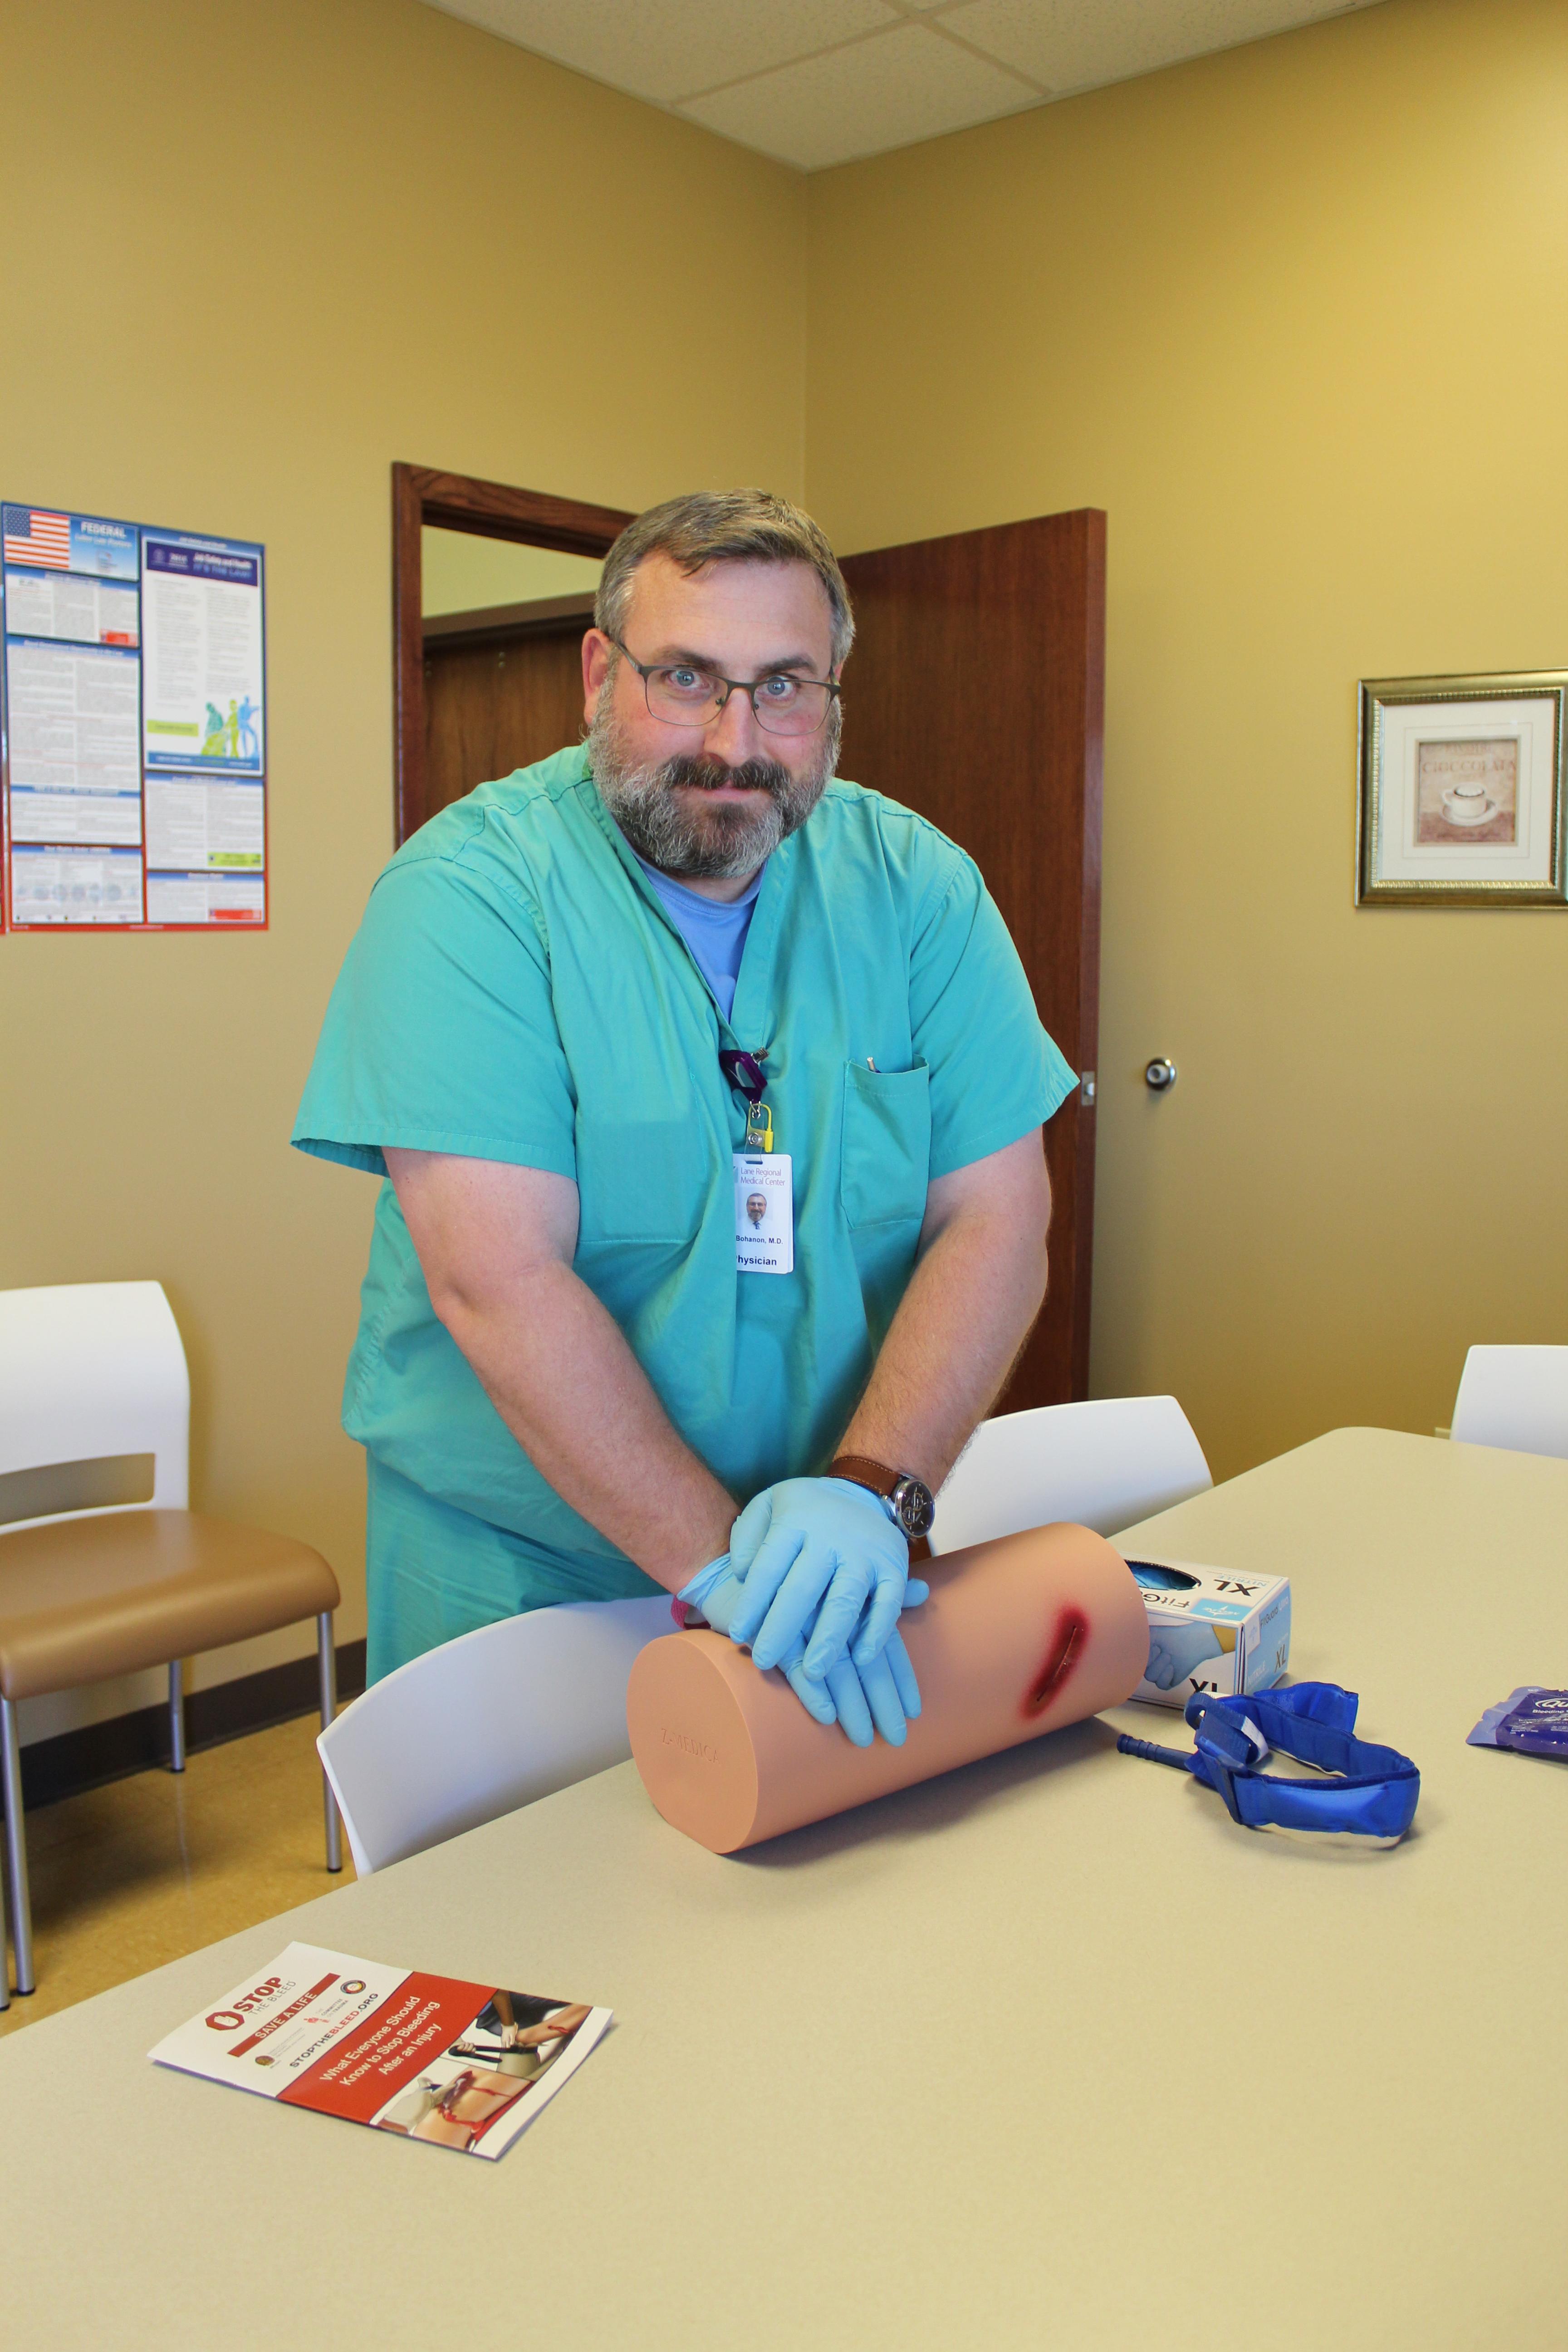 Free Stop the Bleed Training